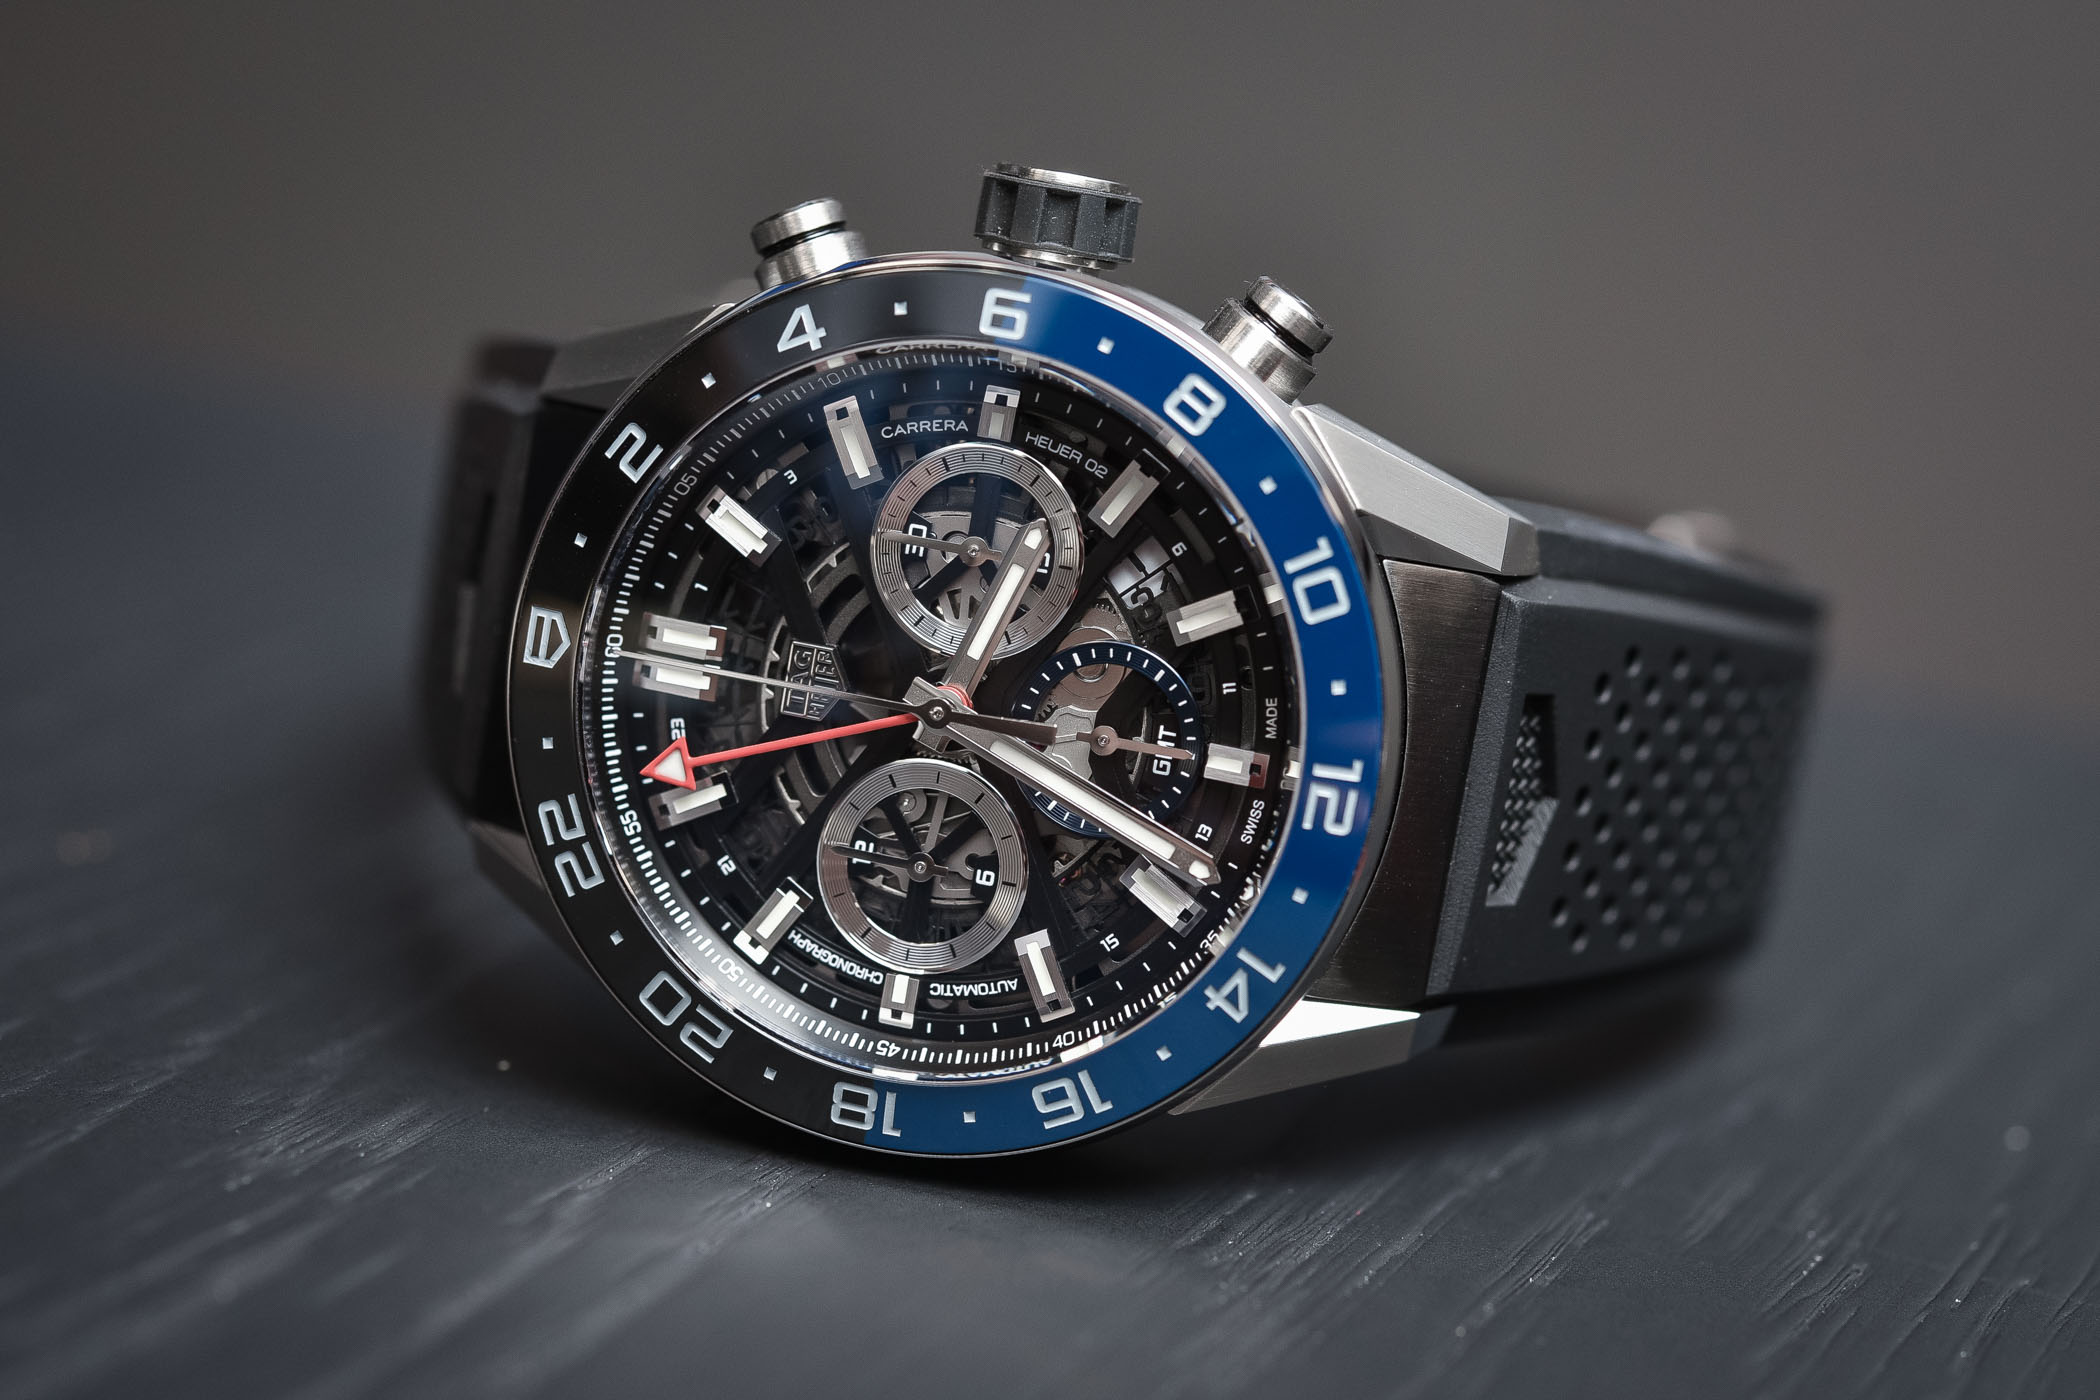 TAG Heuer Carrera Heuer 02 GMT Chronograph review